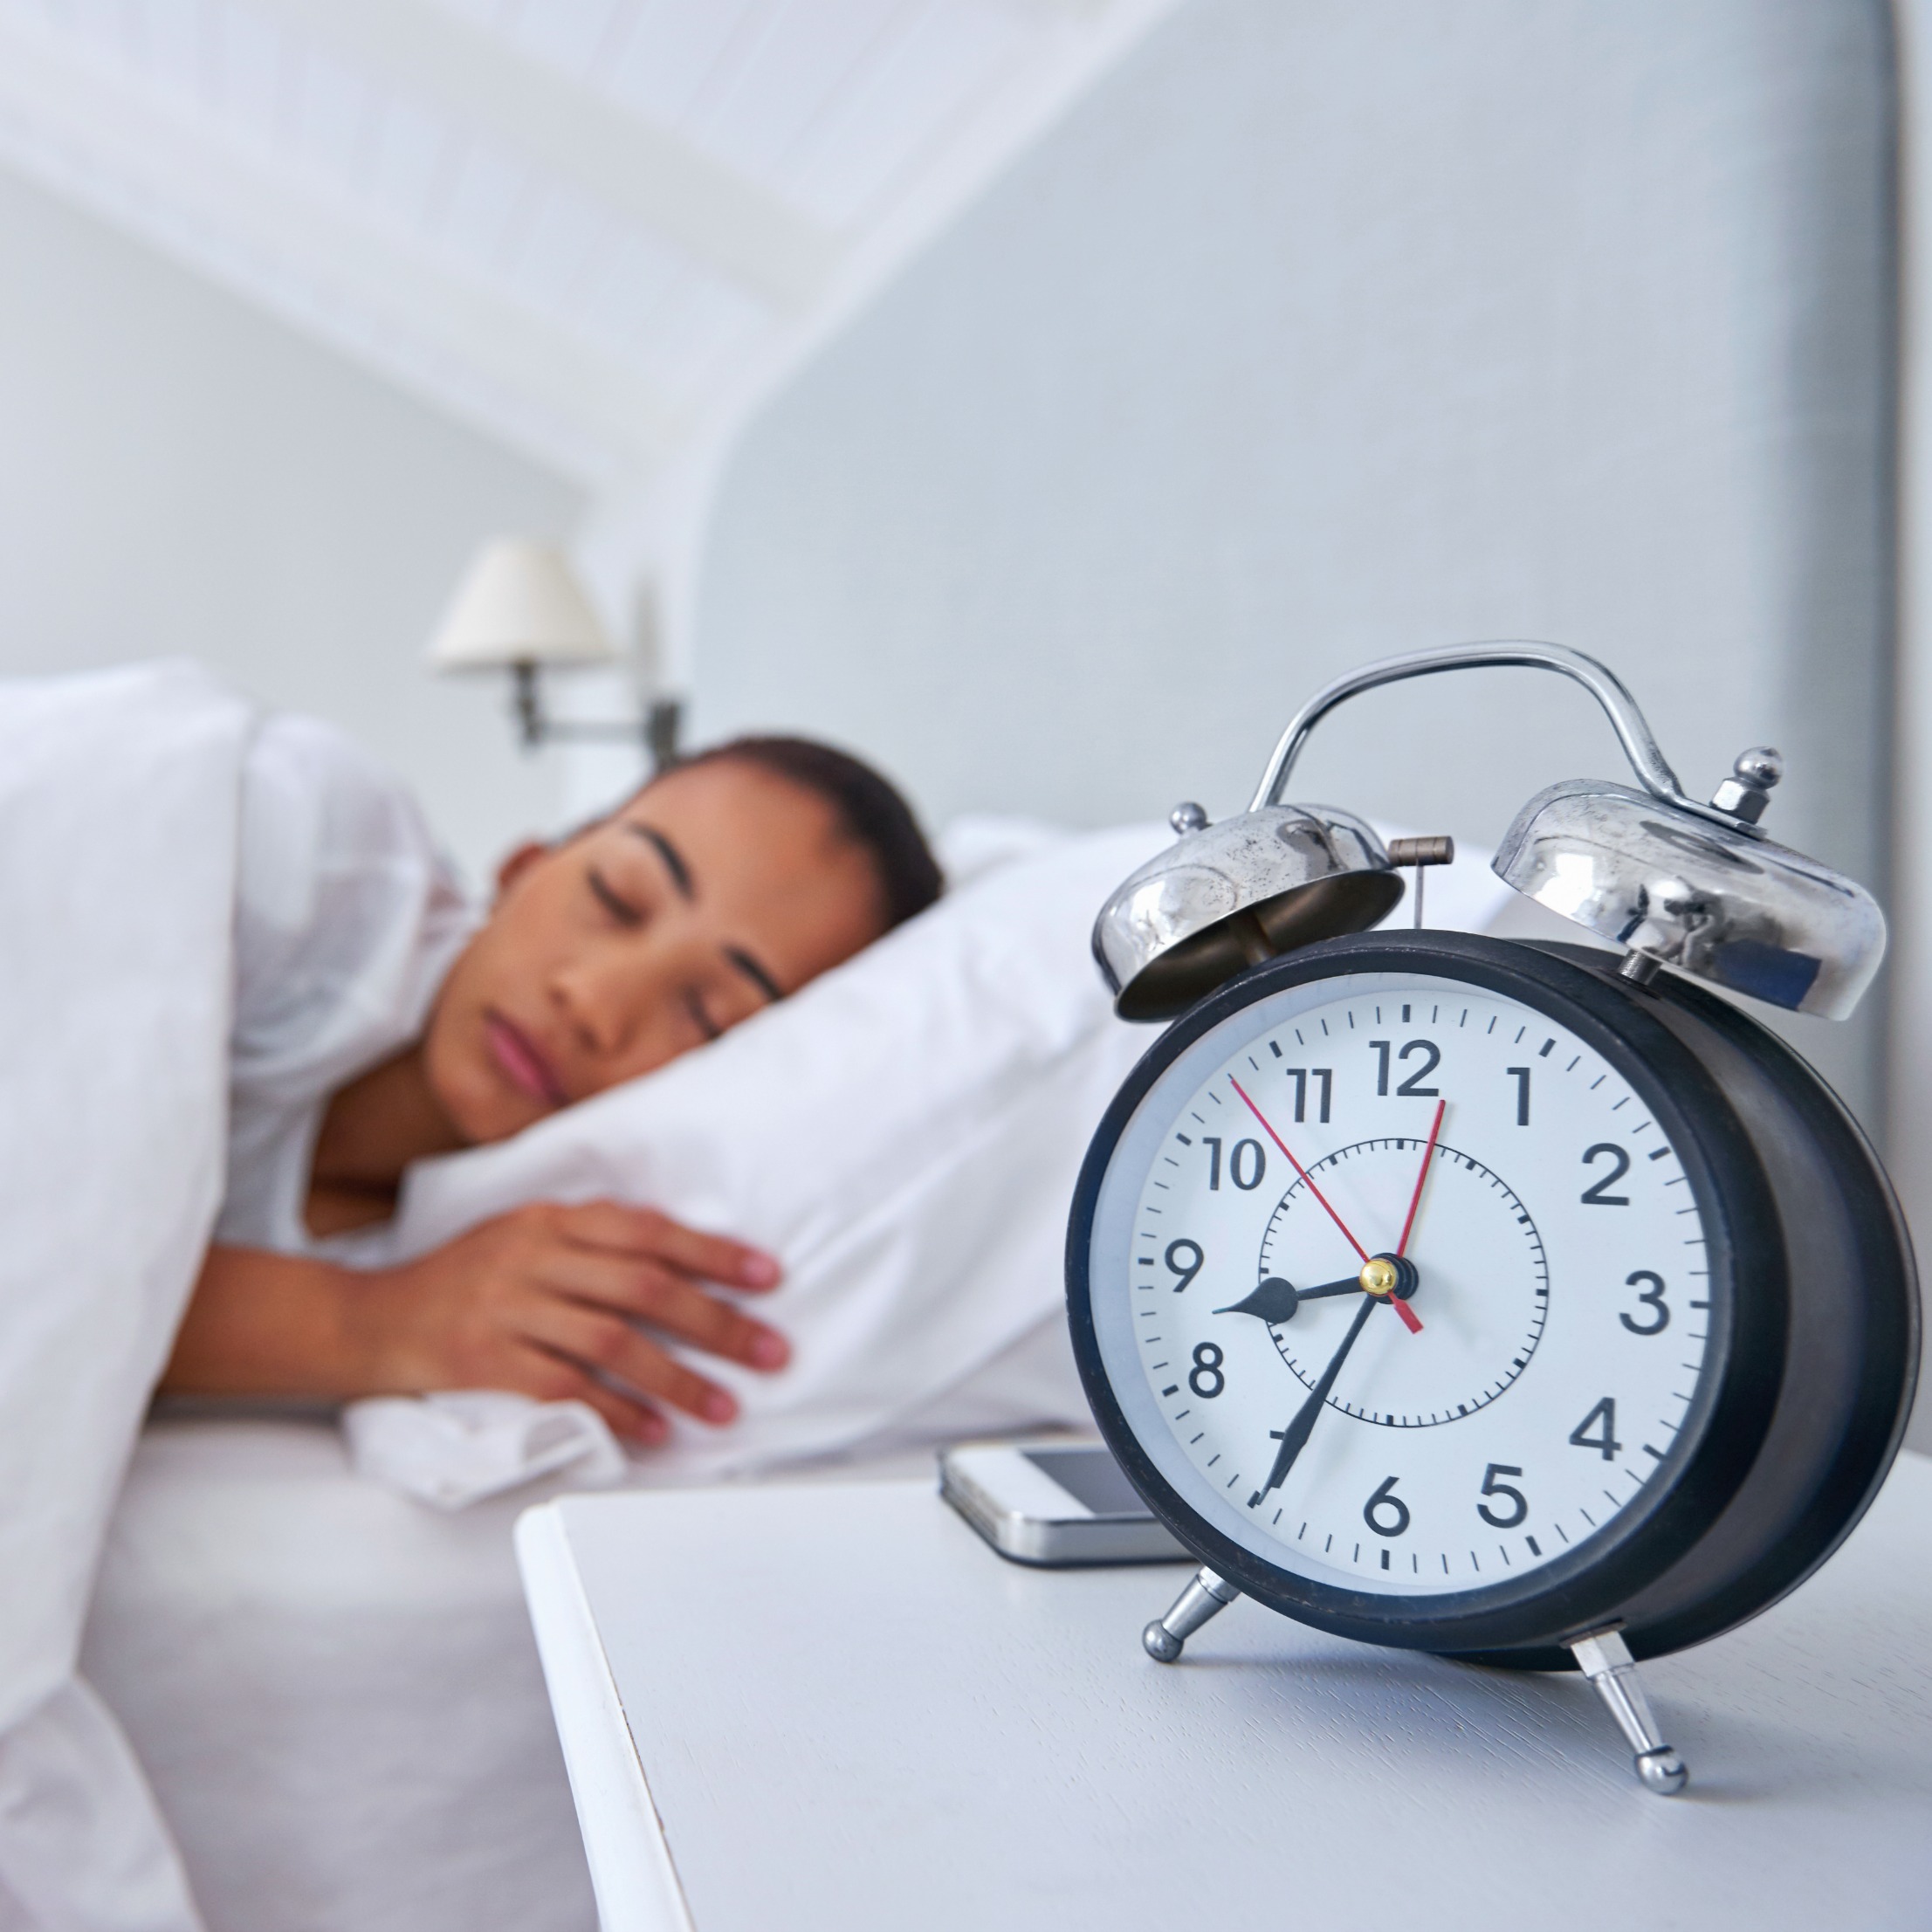 Healthy Habits: All About Sleep